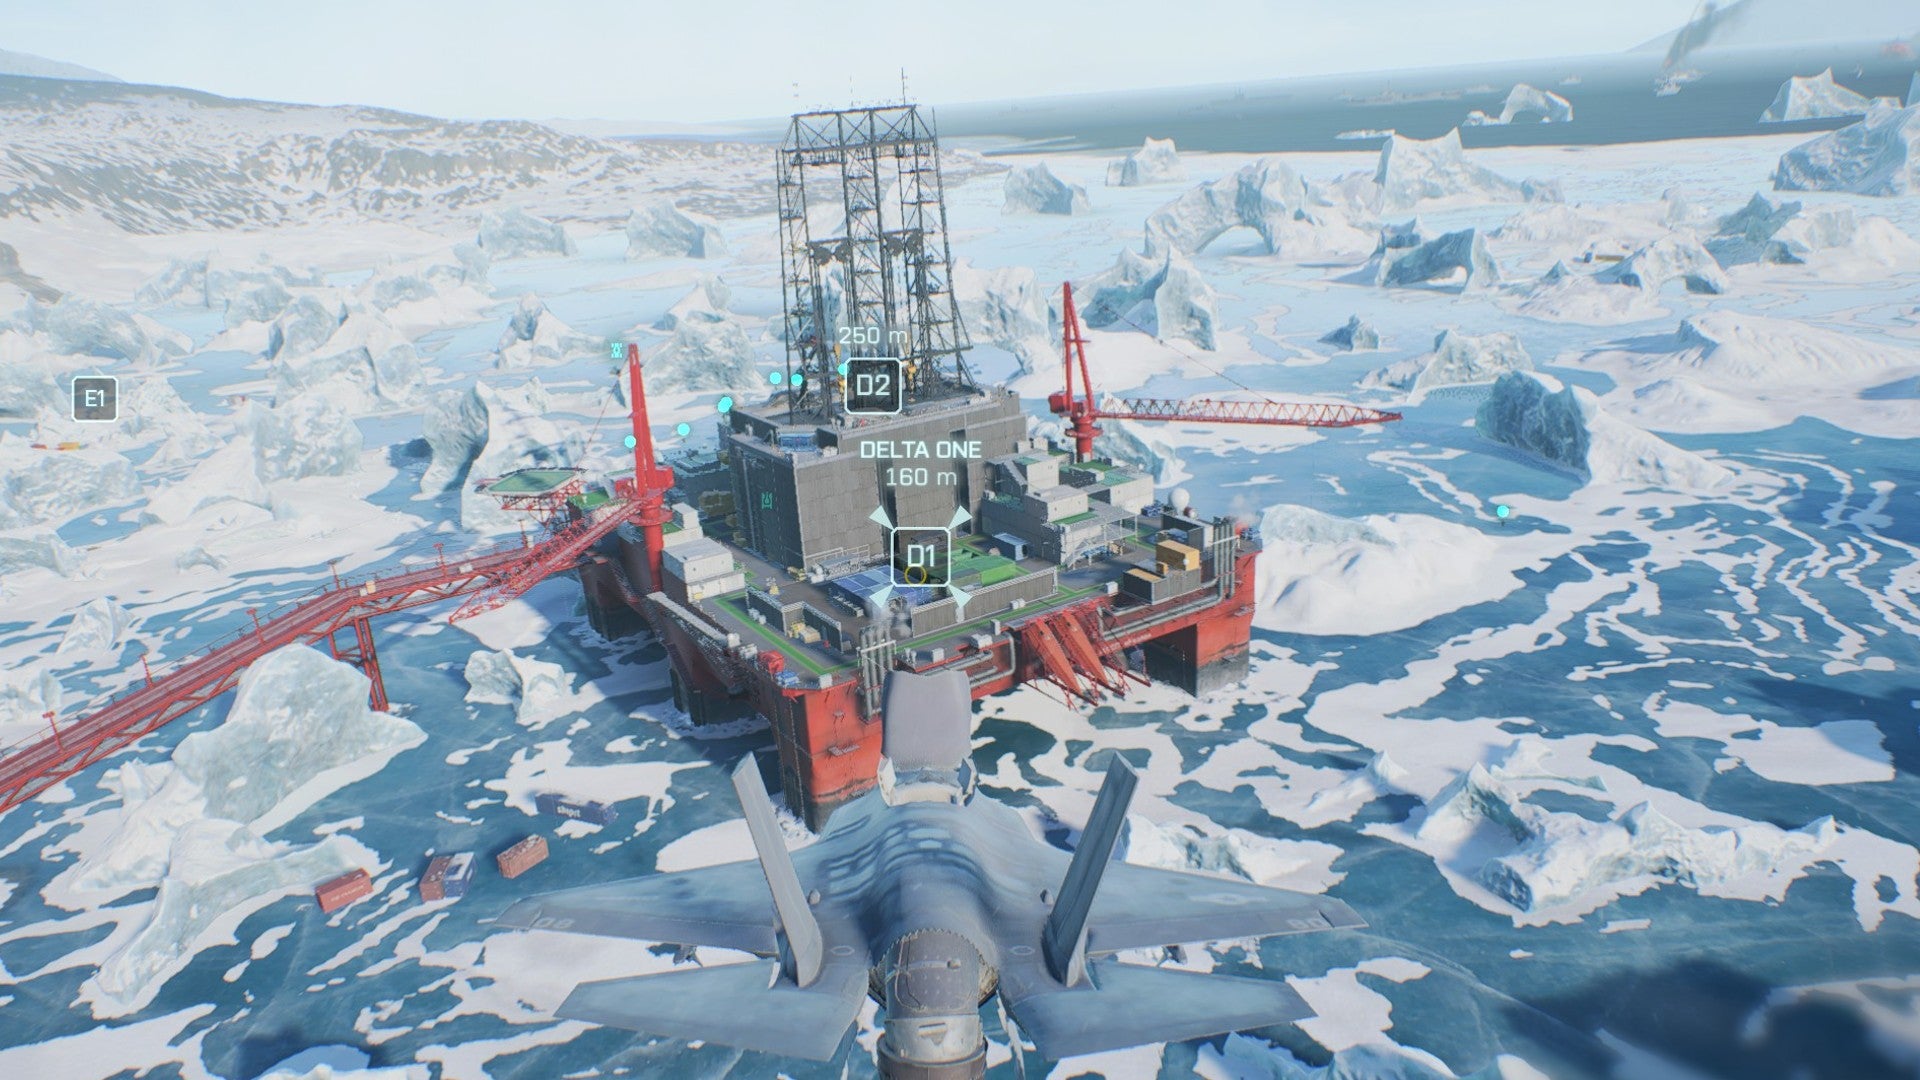 VTOL jet hovering near an oil rig in the middle of a snowy map in Battlefield 2042